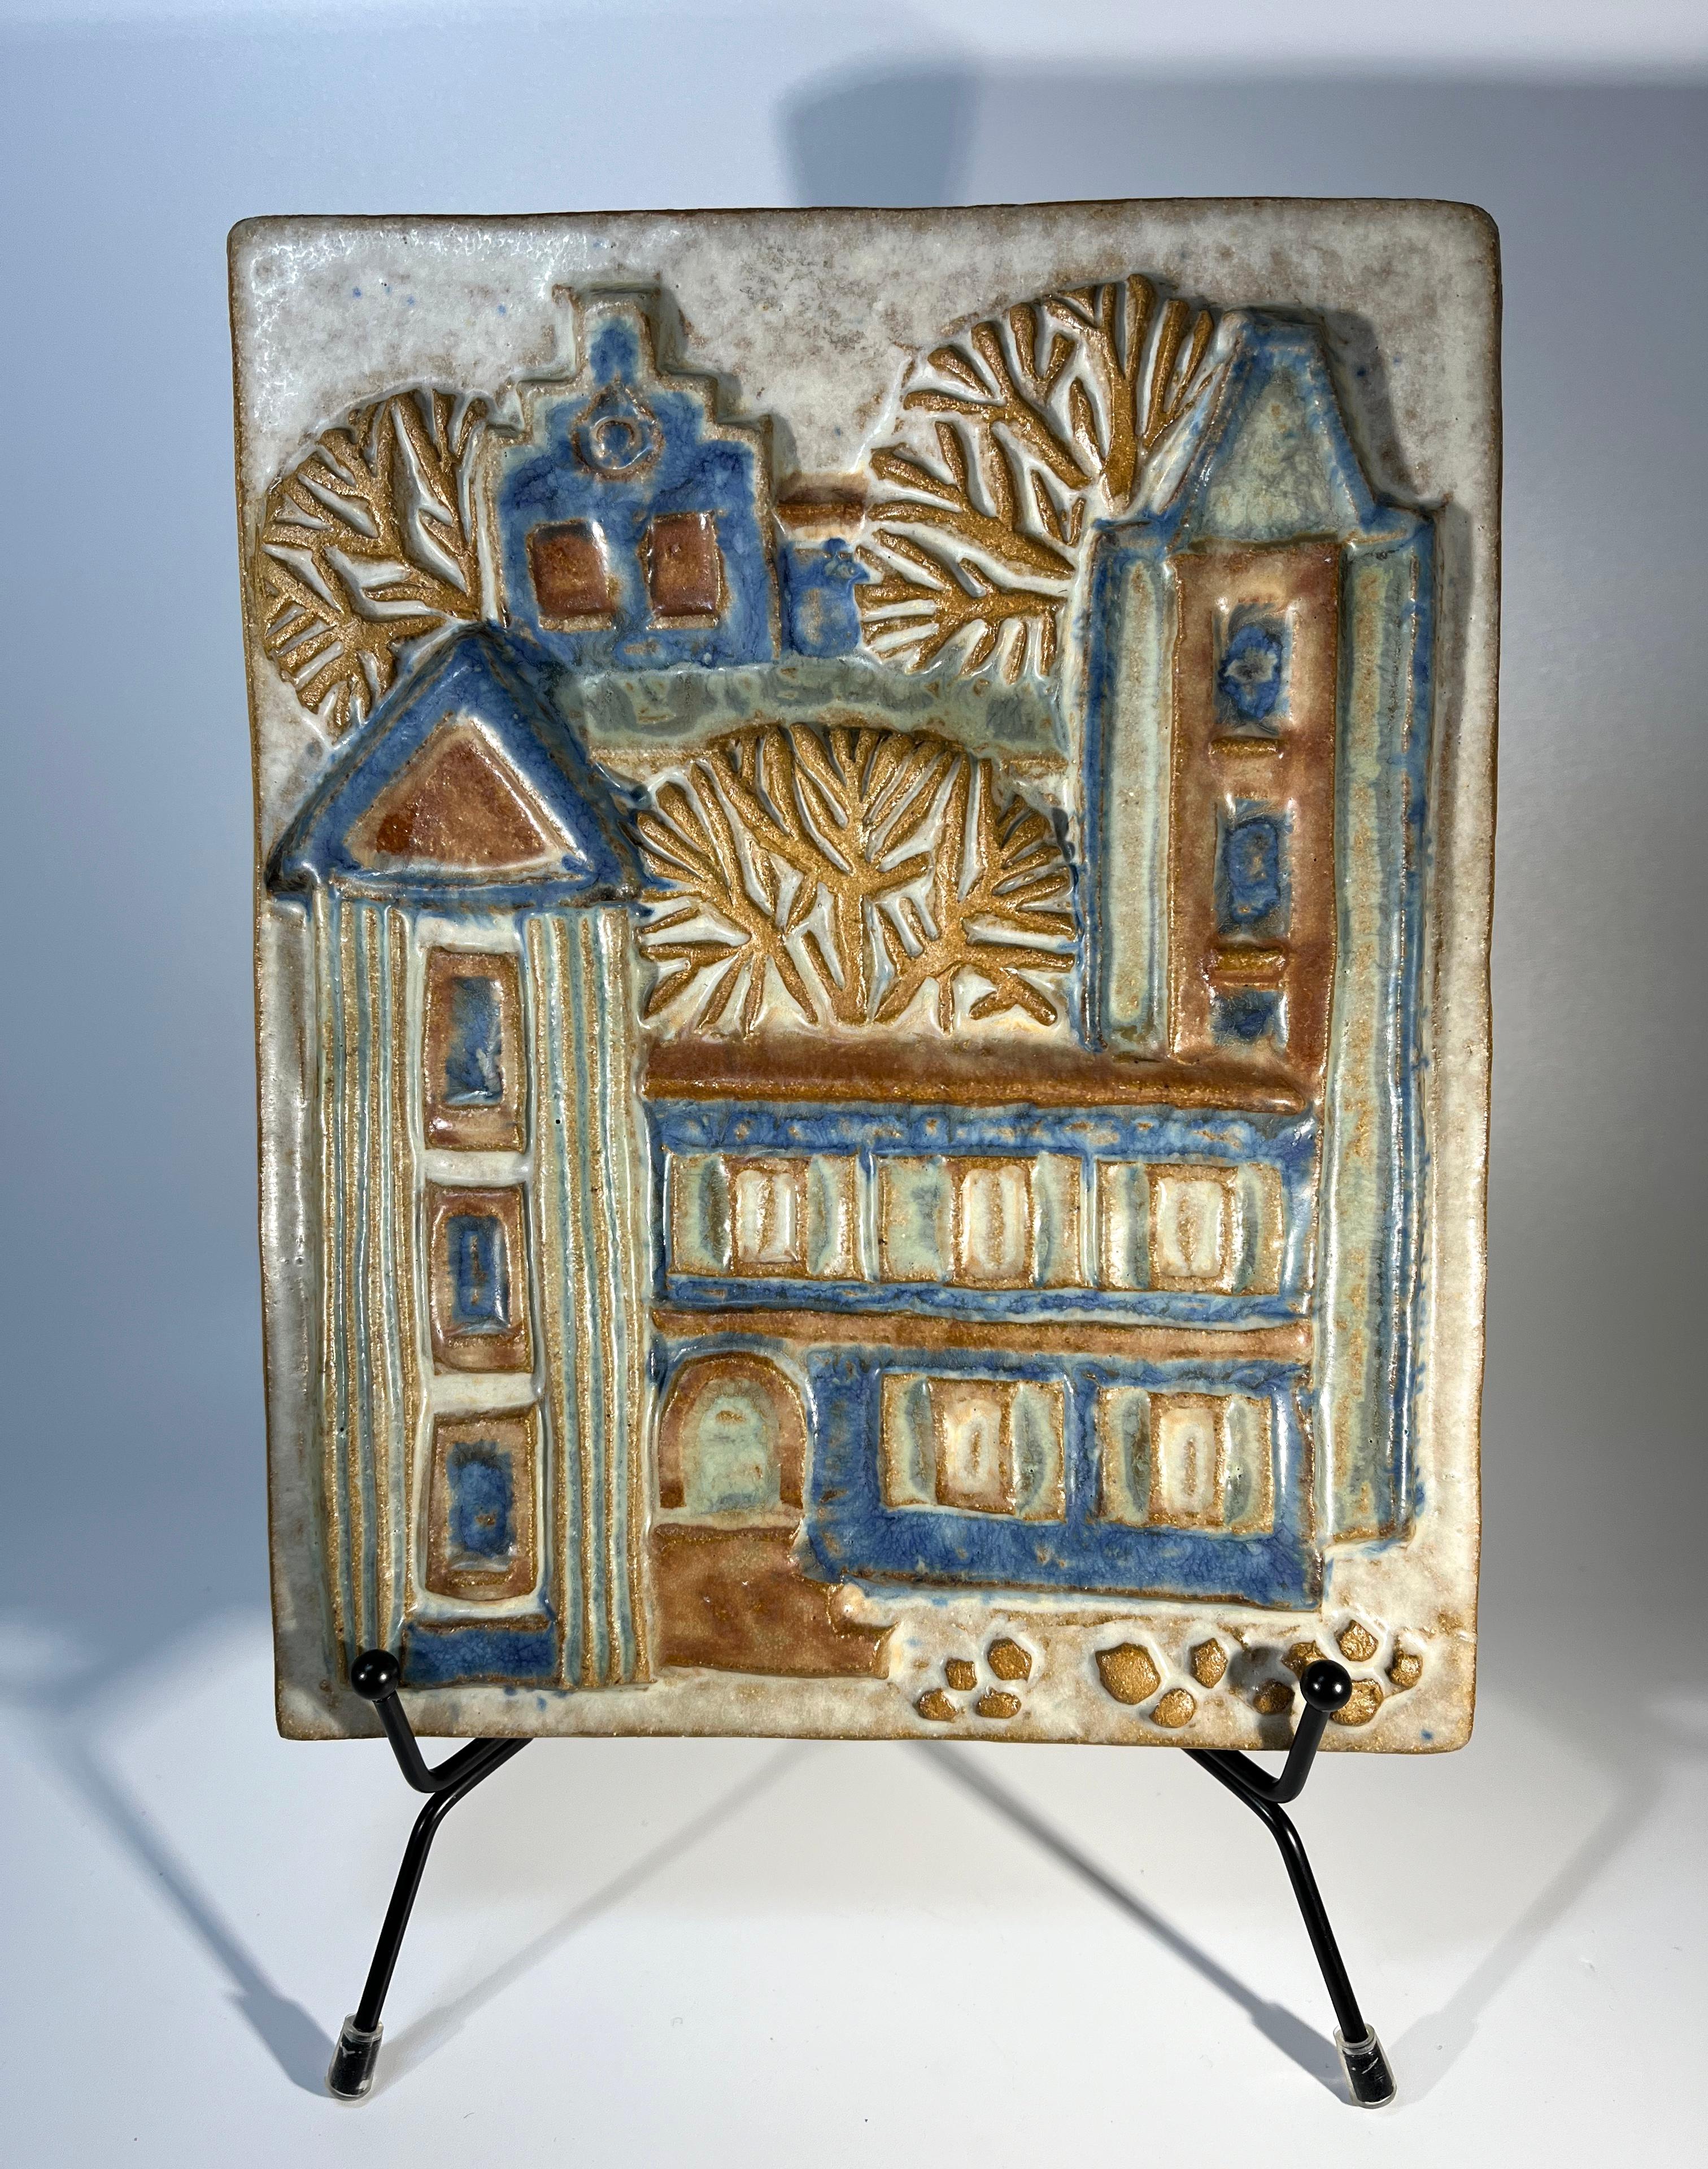 20th Century Bornholm Town By Marianne Starck For Michael Andersen. Danish Wall Plaque For Sale